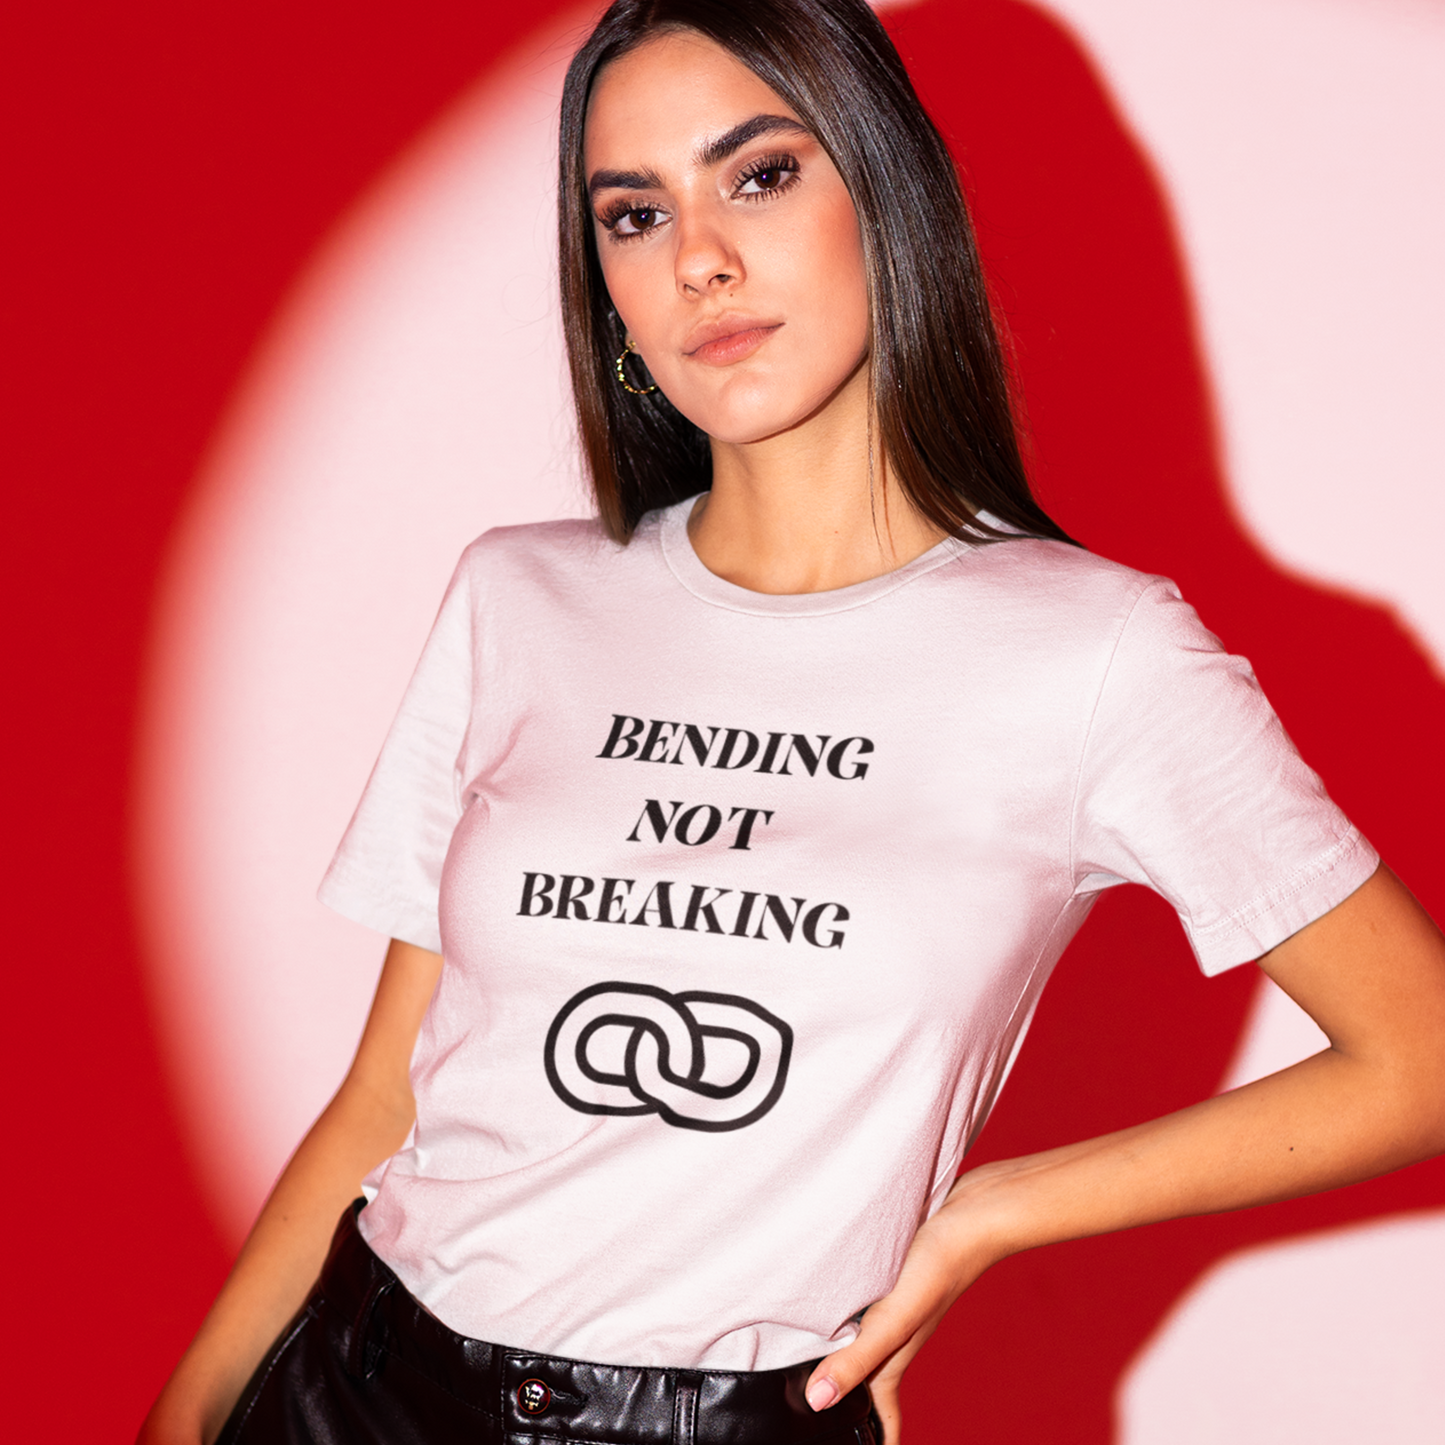 Bending not breaking inspirational words on a t shirt, t shirt that motivates t shirt gifts for friends and family